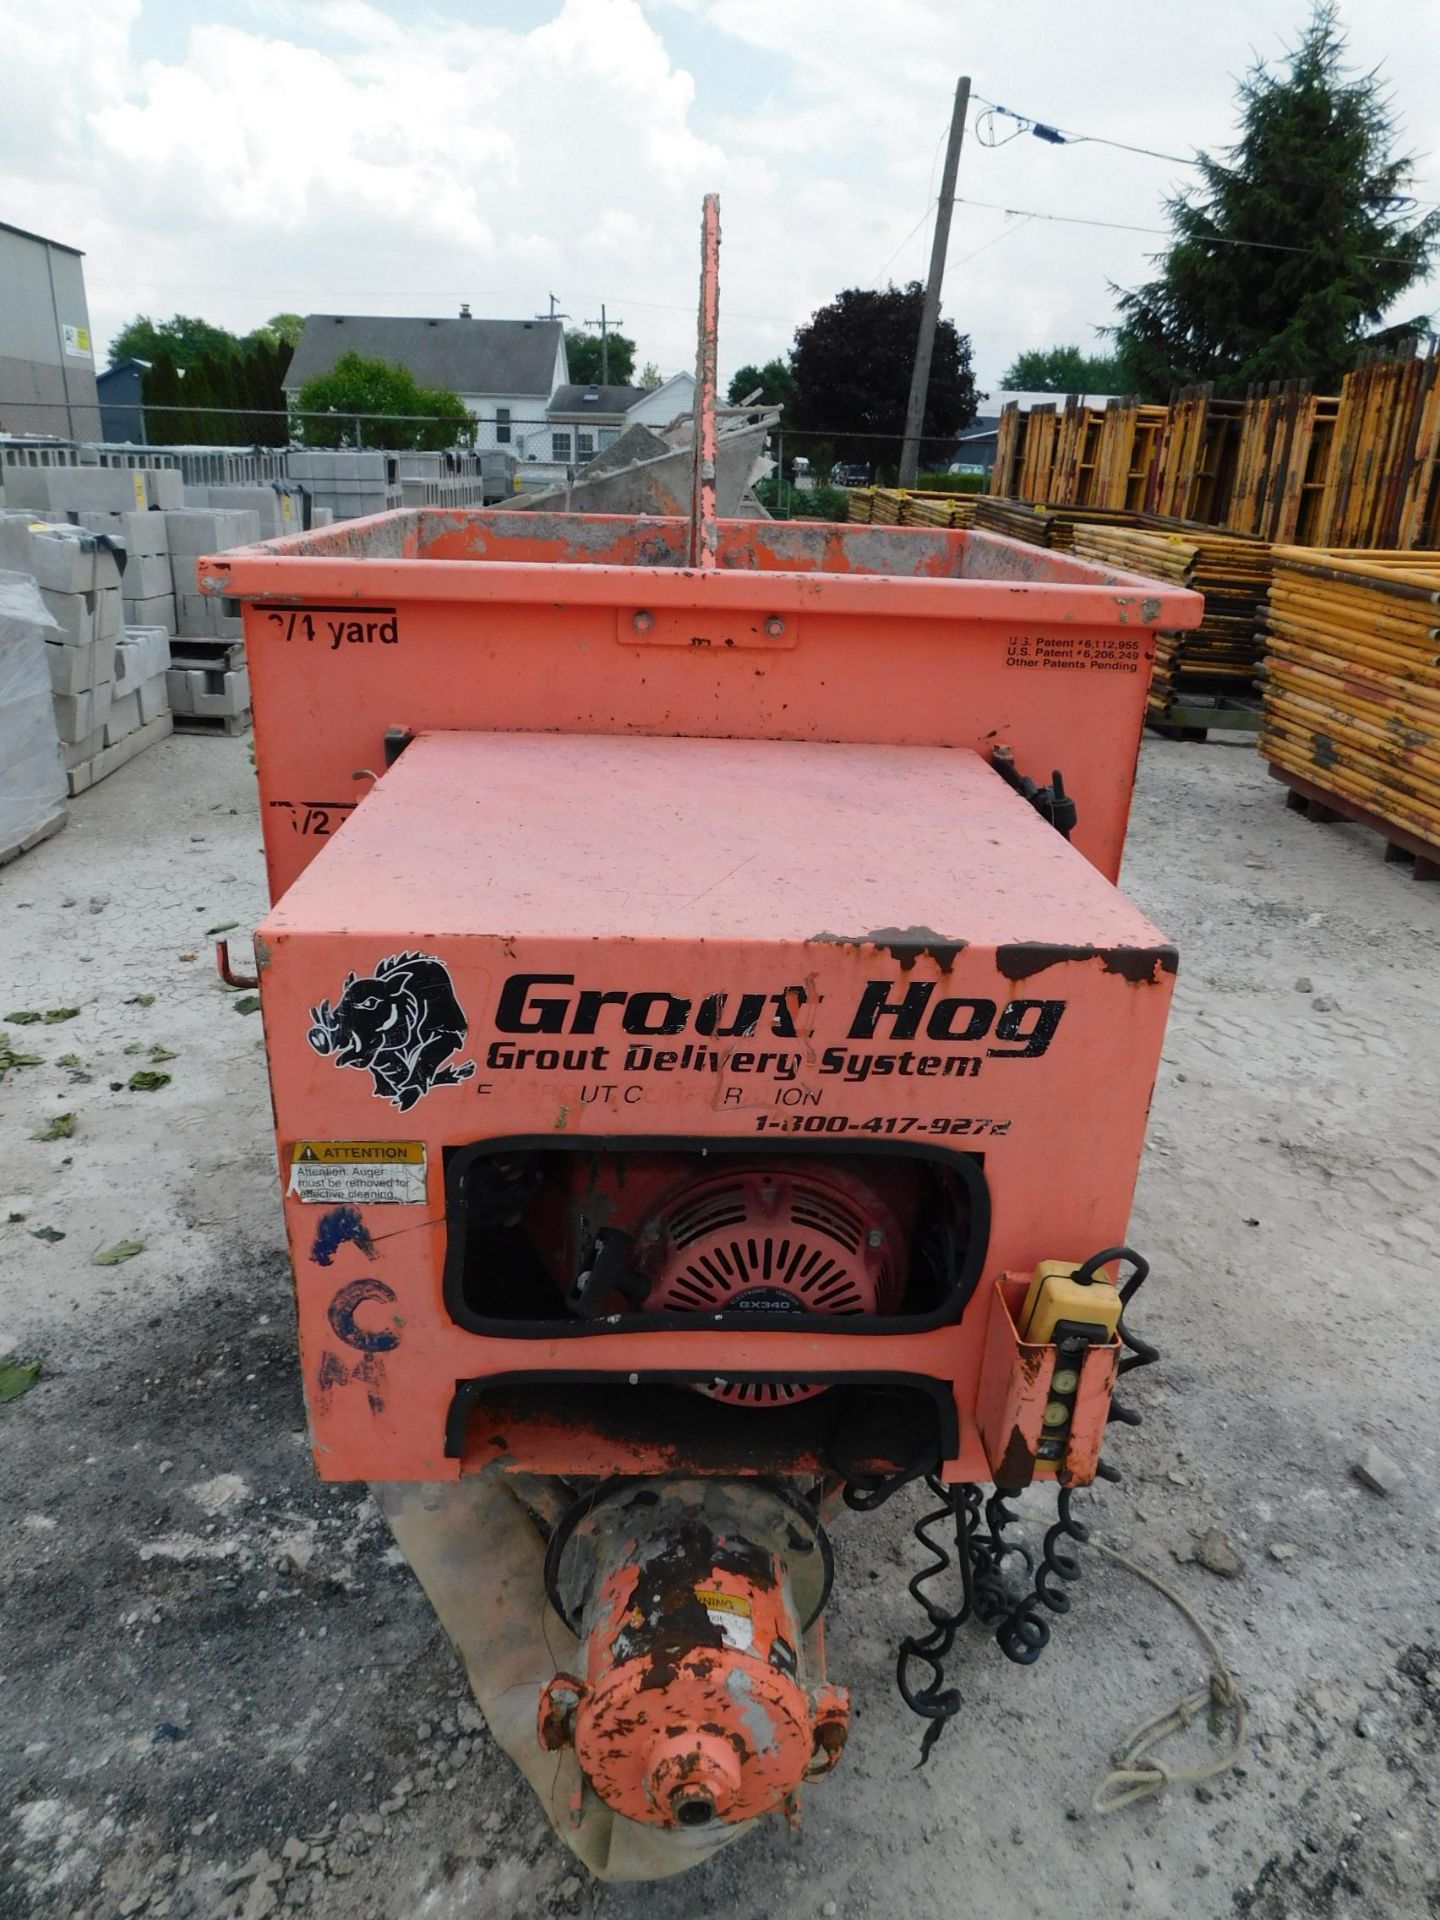 Grout Hog Model GPHC75 Gas-Powered Portable Grout Delivery System, SN GPHC750108, Honda Gas Engine - Image 2 of 9